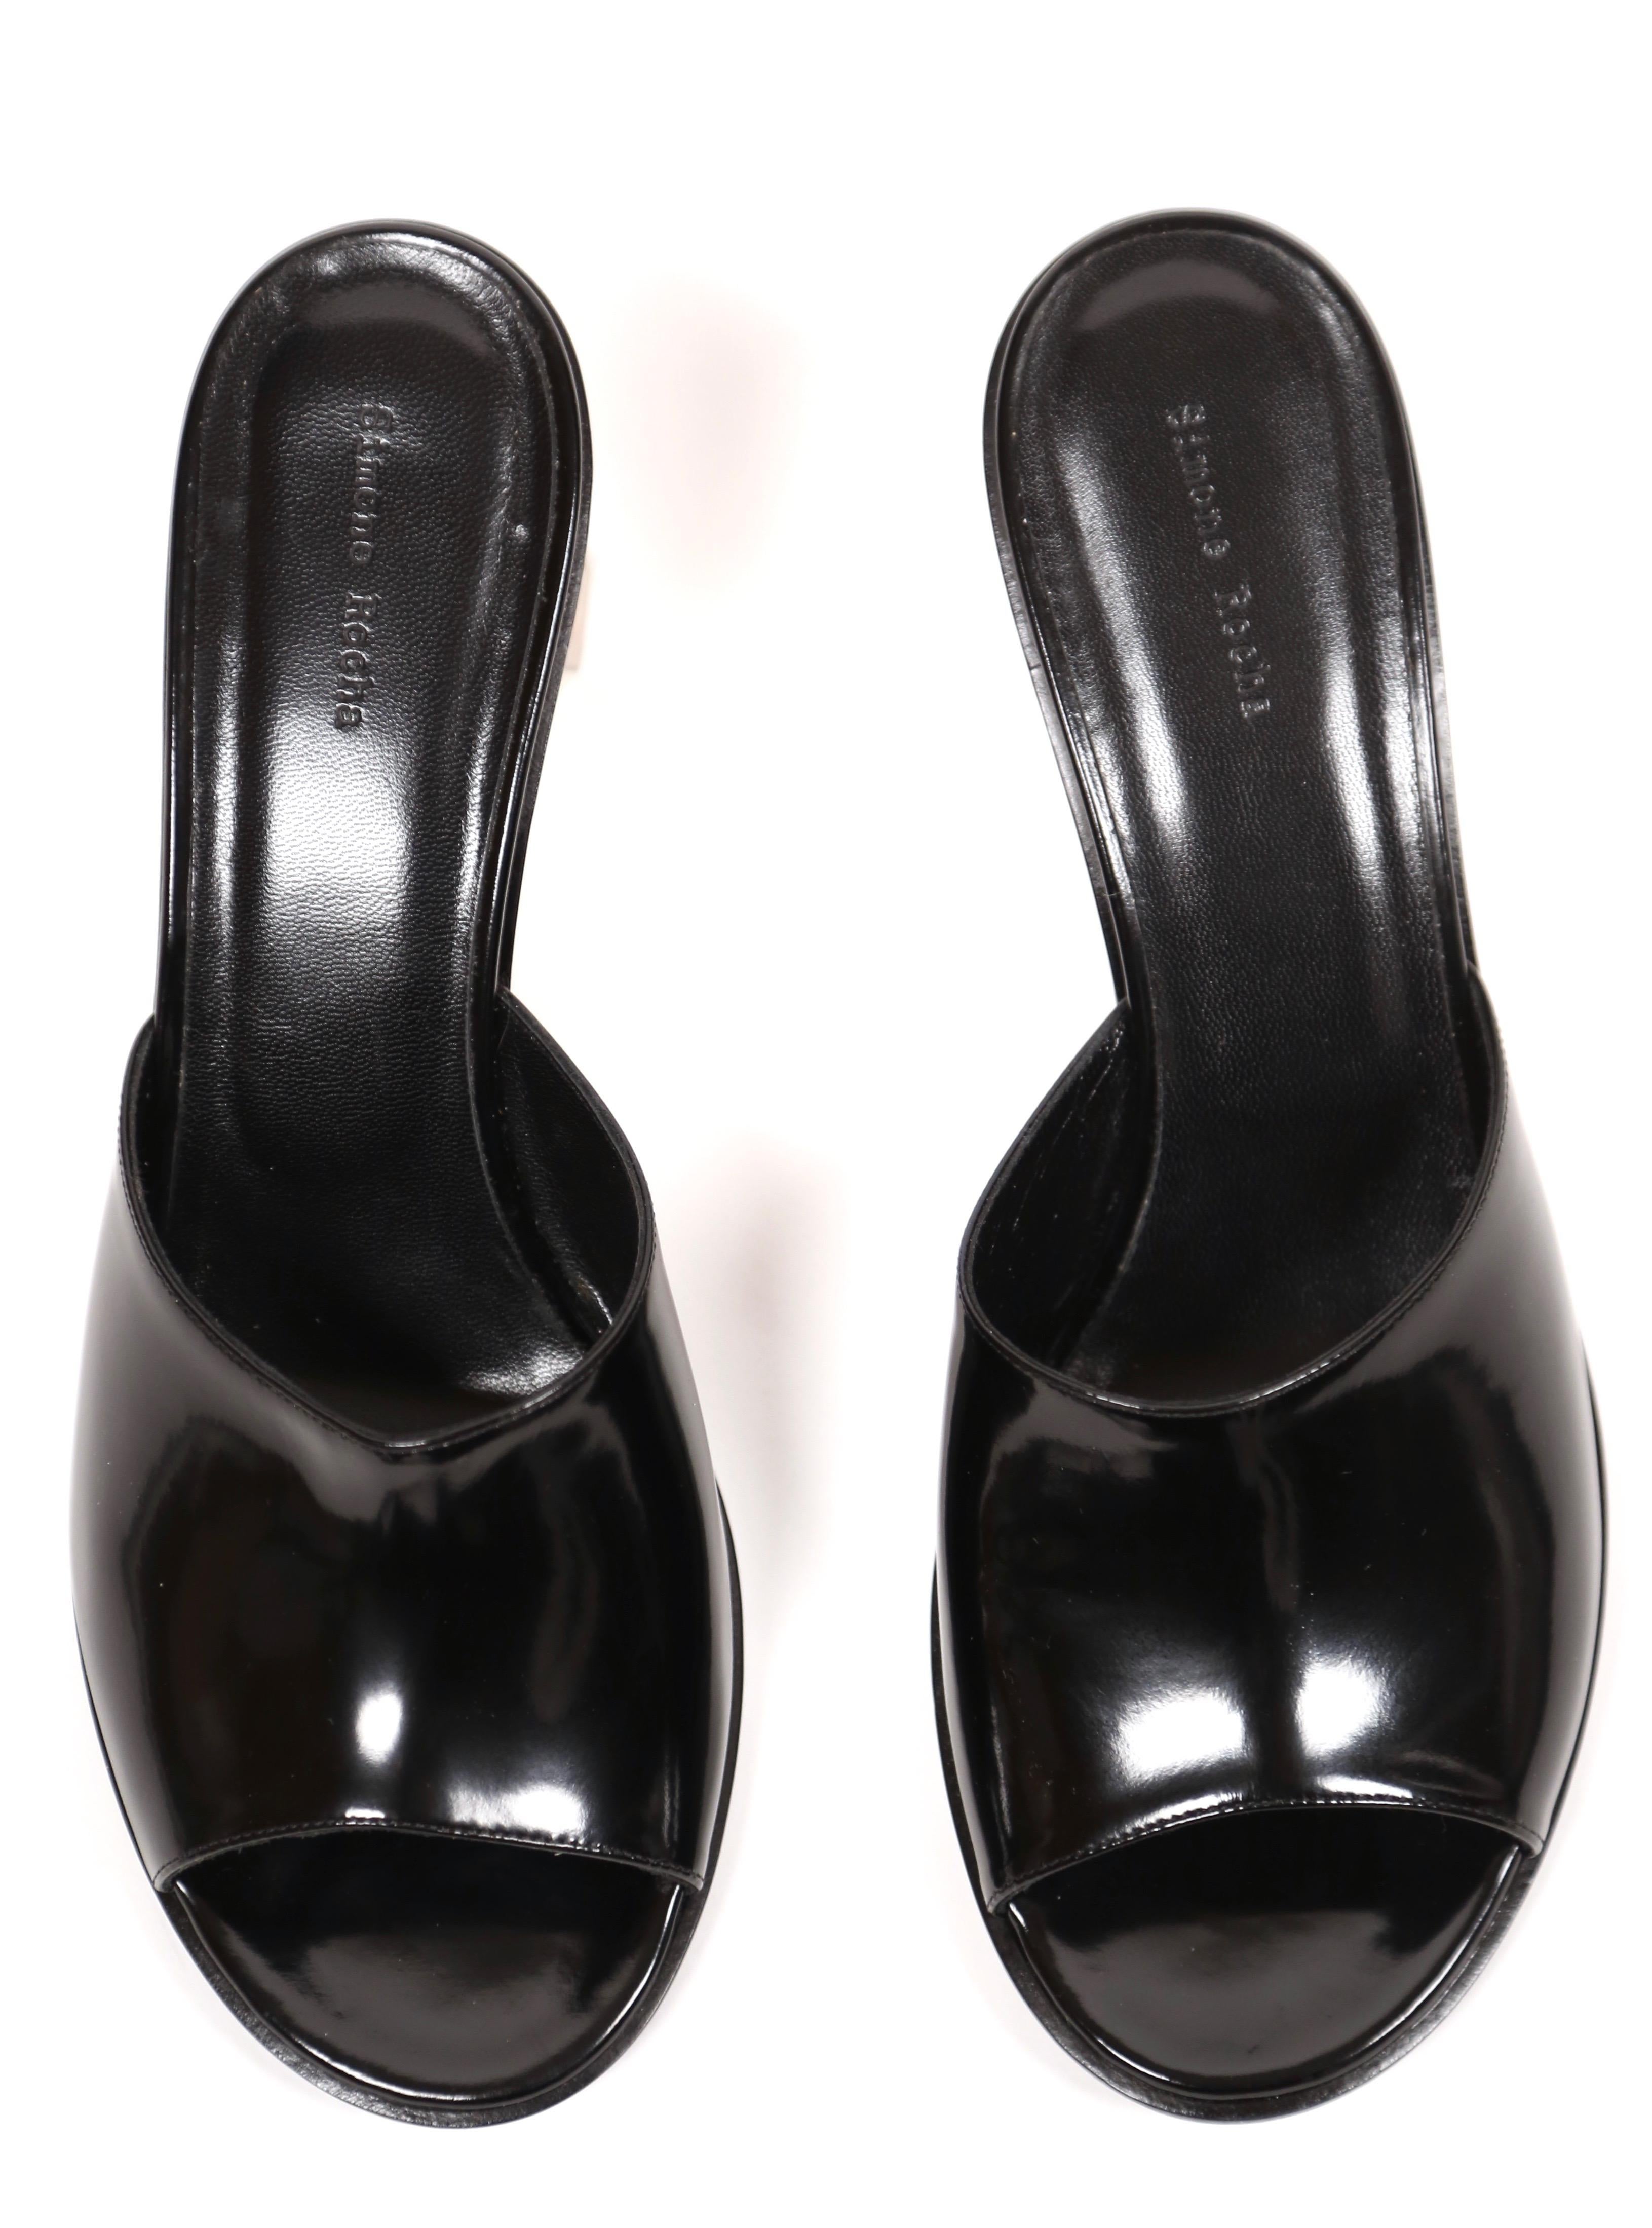 Jet- black patent slide sandals with faceted clear 'chandelier' heels designed by Simone Rocha. Euro size 41. Insoles measure approximately: 10.75